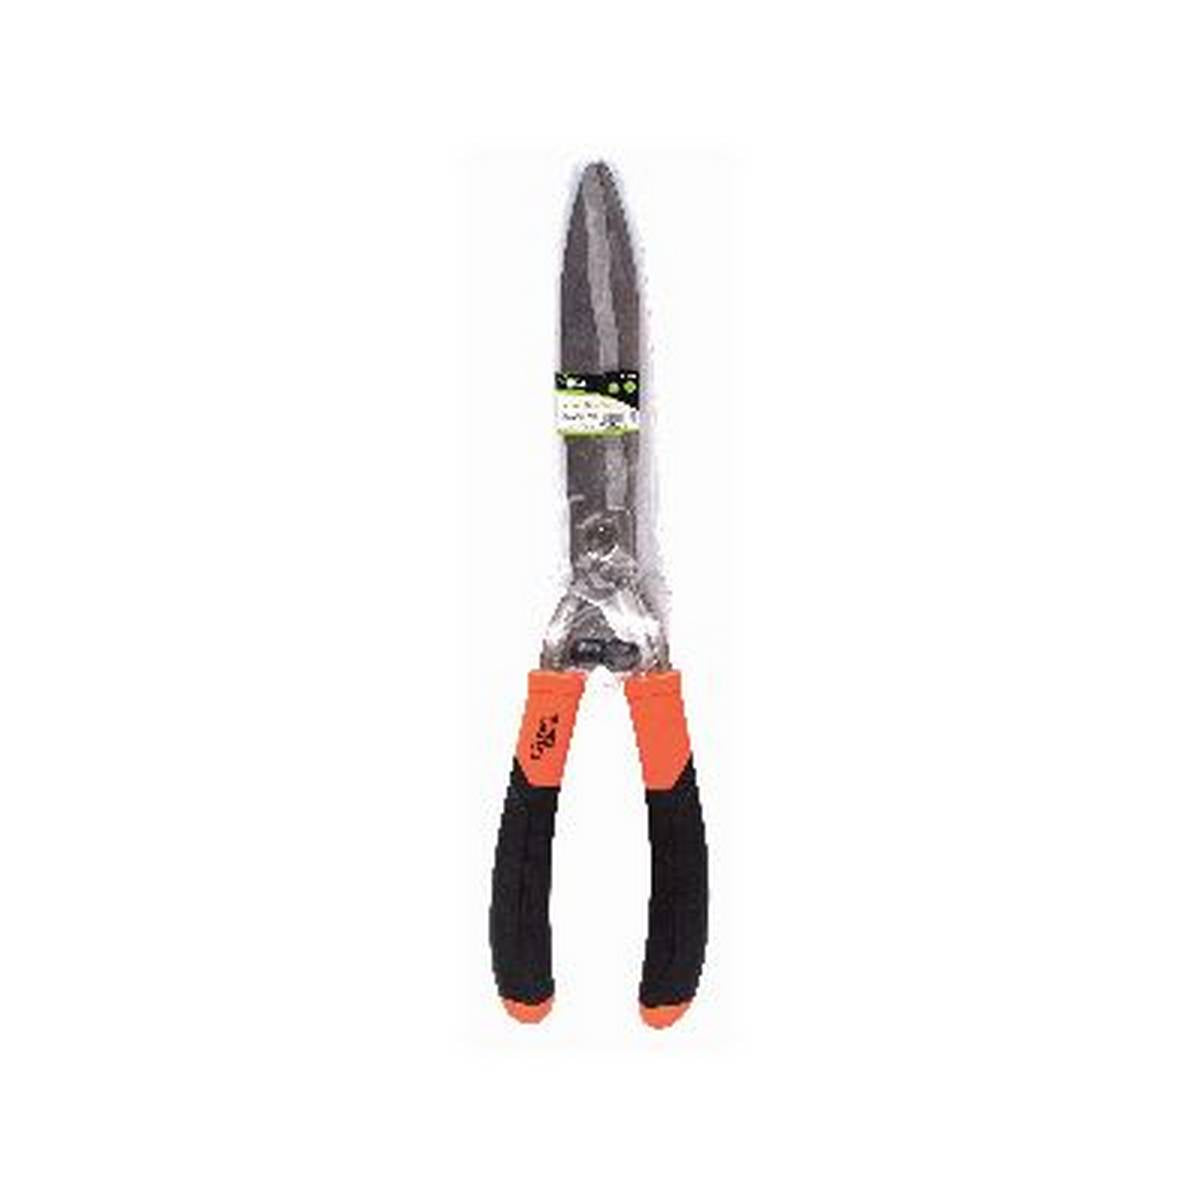 GREENBLADE GREEN BLADE 9" HEDGE SHEARS WITH TPR GRIP BB-GT098